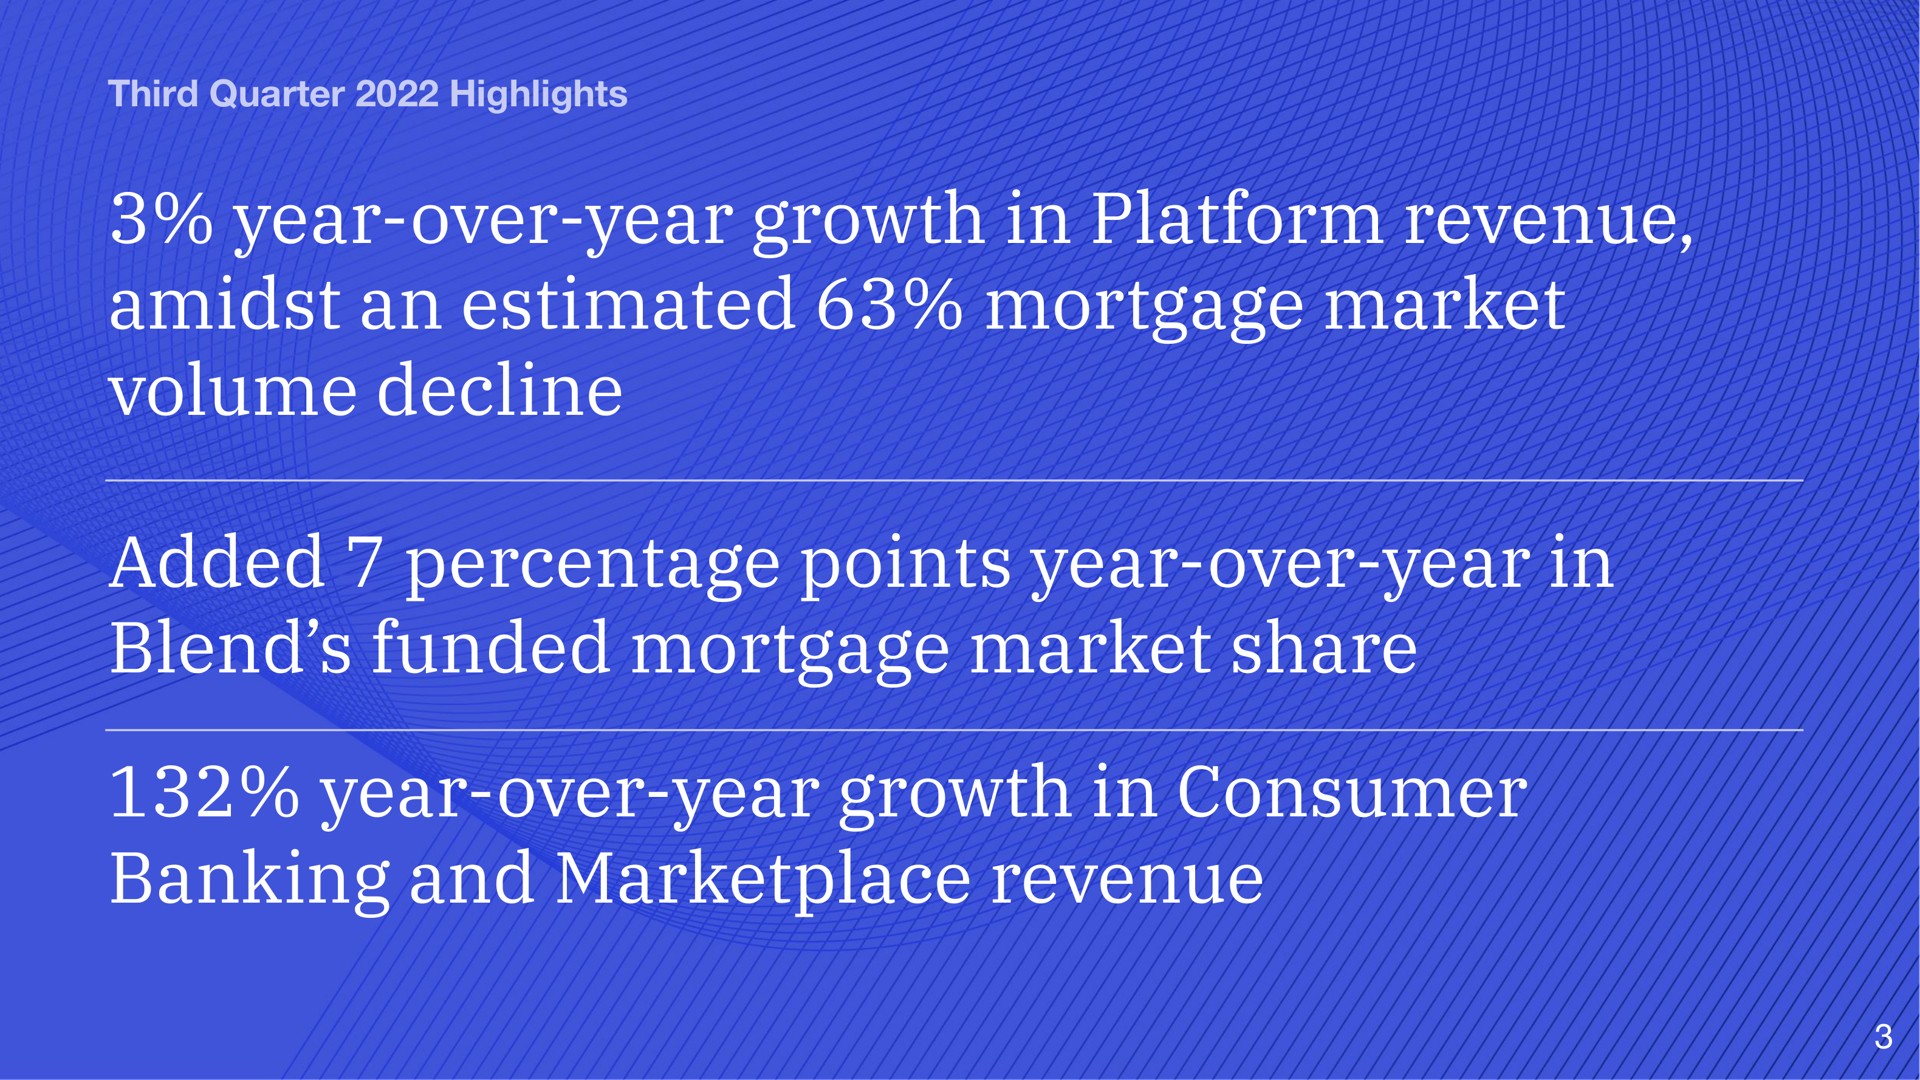 third quarter highlights year over year growth in platform revenue amidst an estimated mortgage market volume decline added percentage points year over year in blend funded mortgage market share year over year growth in consumer banking and revenue | Blend